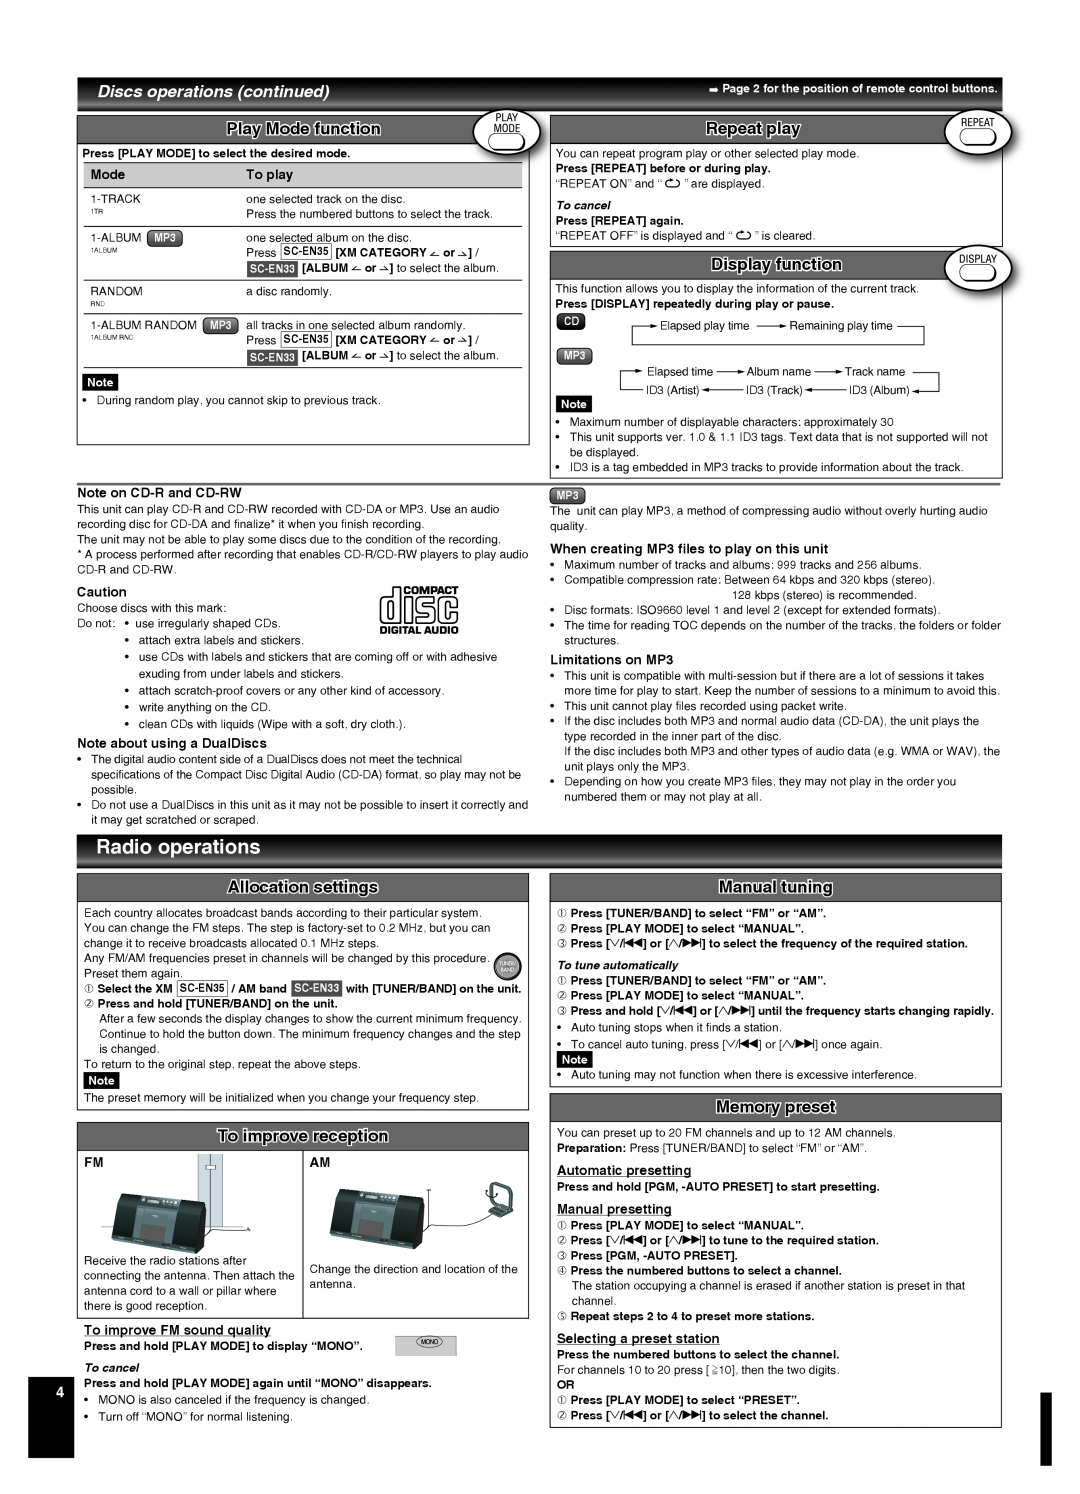 Panasonic SCEN35 manual Radio operations, Play Mode function, Display function, Allocation settings, To improve reception 